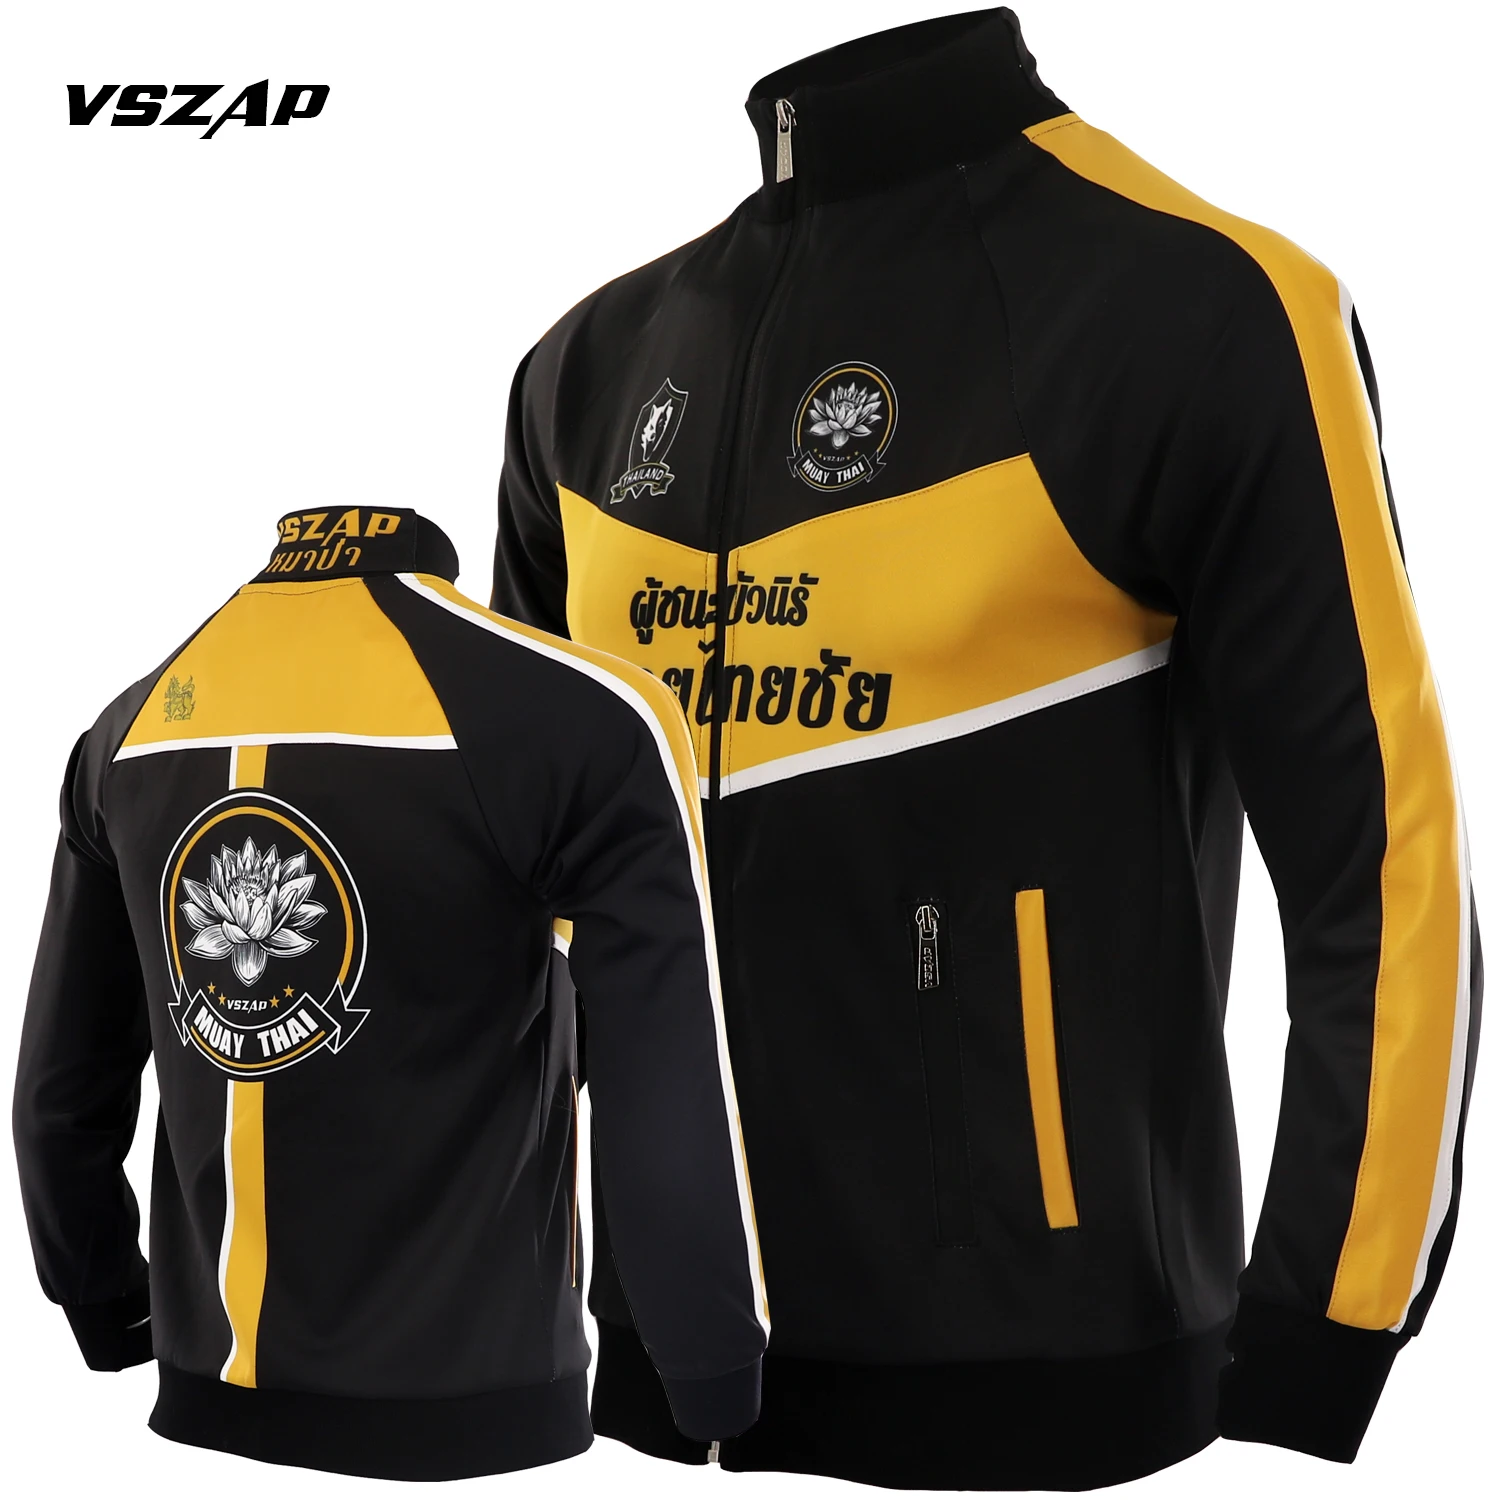 

VSZAP Muay Thai Fighting Jacket Men's Sports Fighting Competition Jacket Martial Arts Training MMA Fitness Broadcasting Clothing